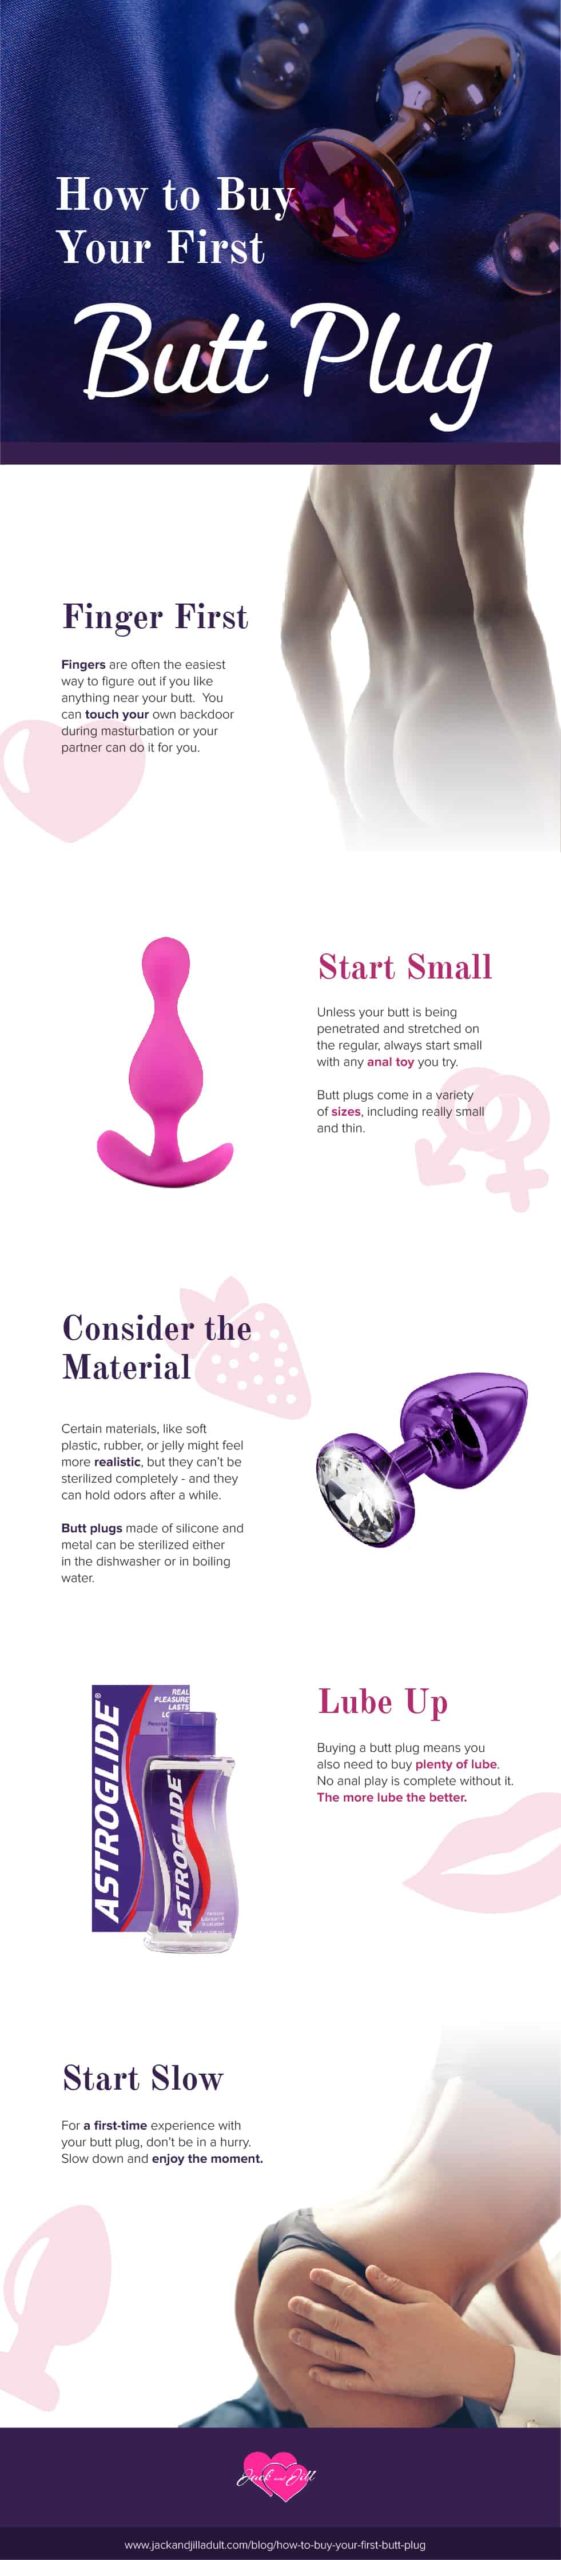 Infographic for How to Buy Your First Butt Plug